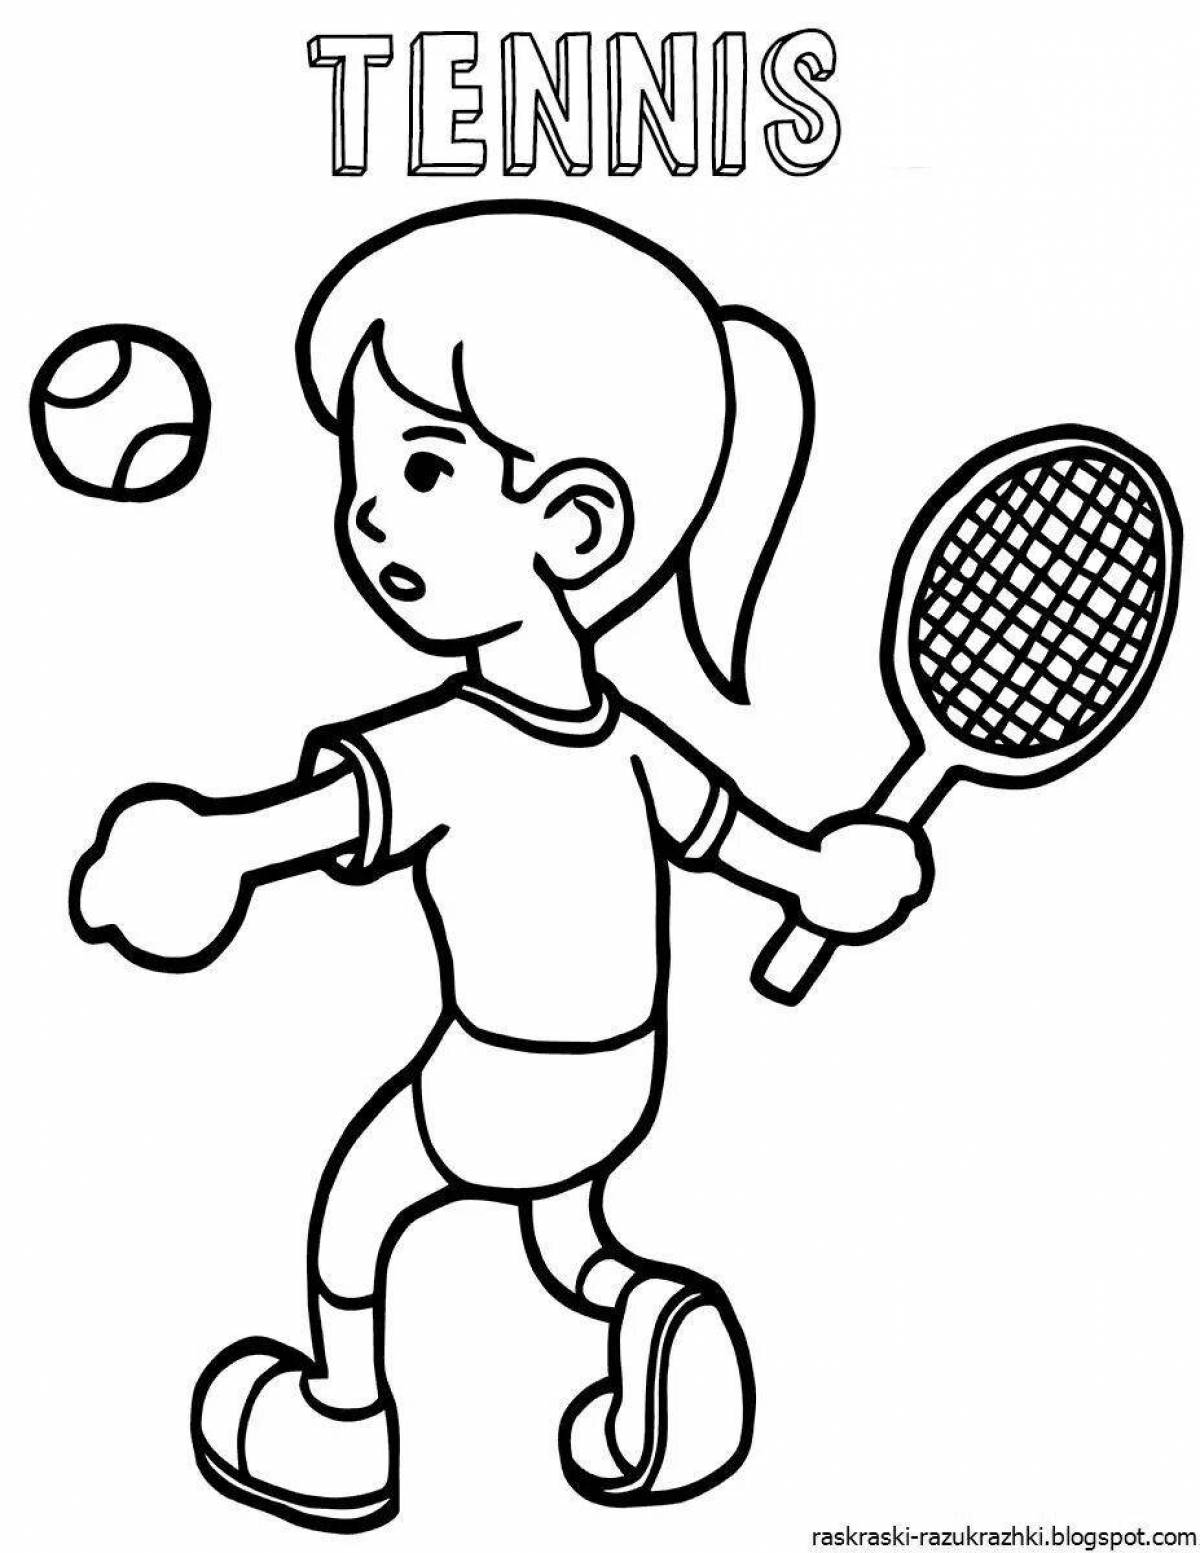 Entertaining sports coloring pages for kids